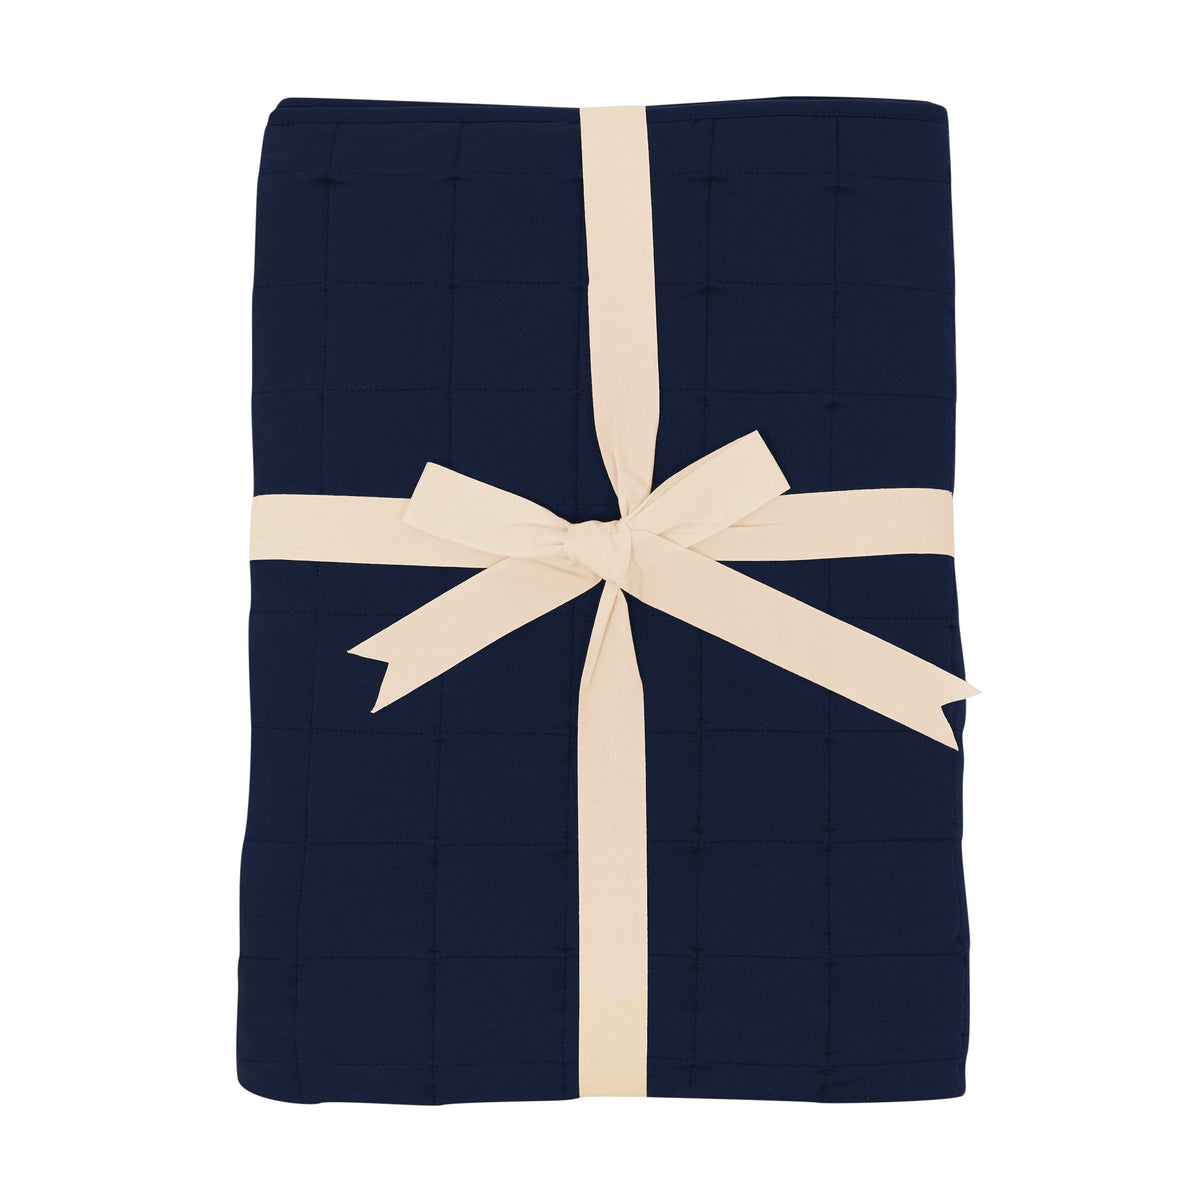 Kyte Baby Youth Blanket 1.0 Tog Navy / Youth Youth Blanket in Navy 1.0